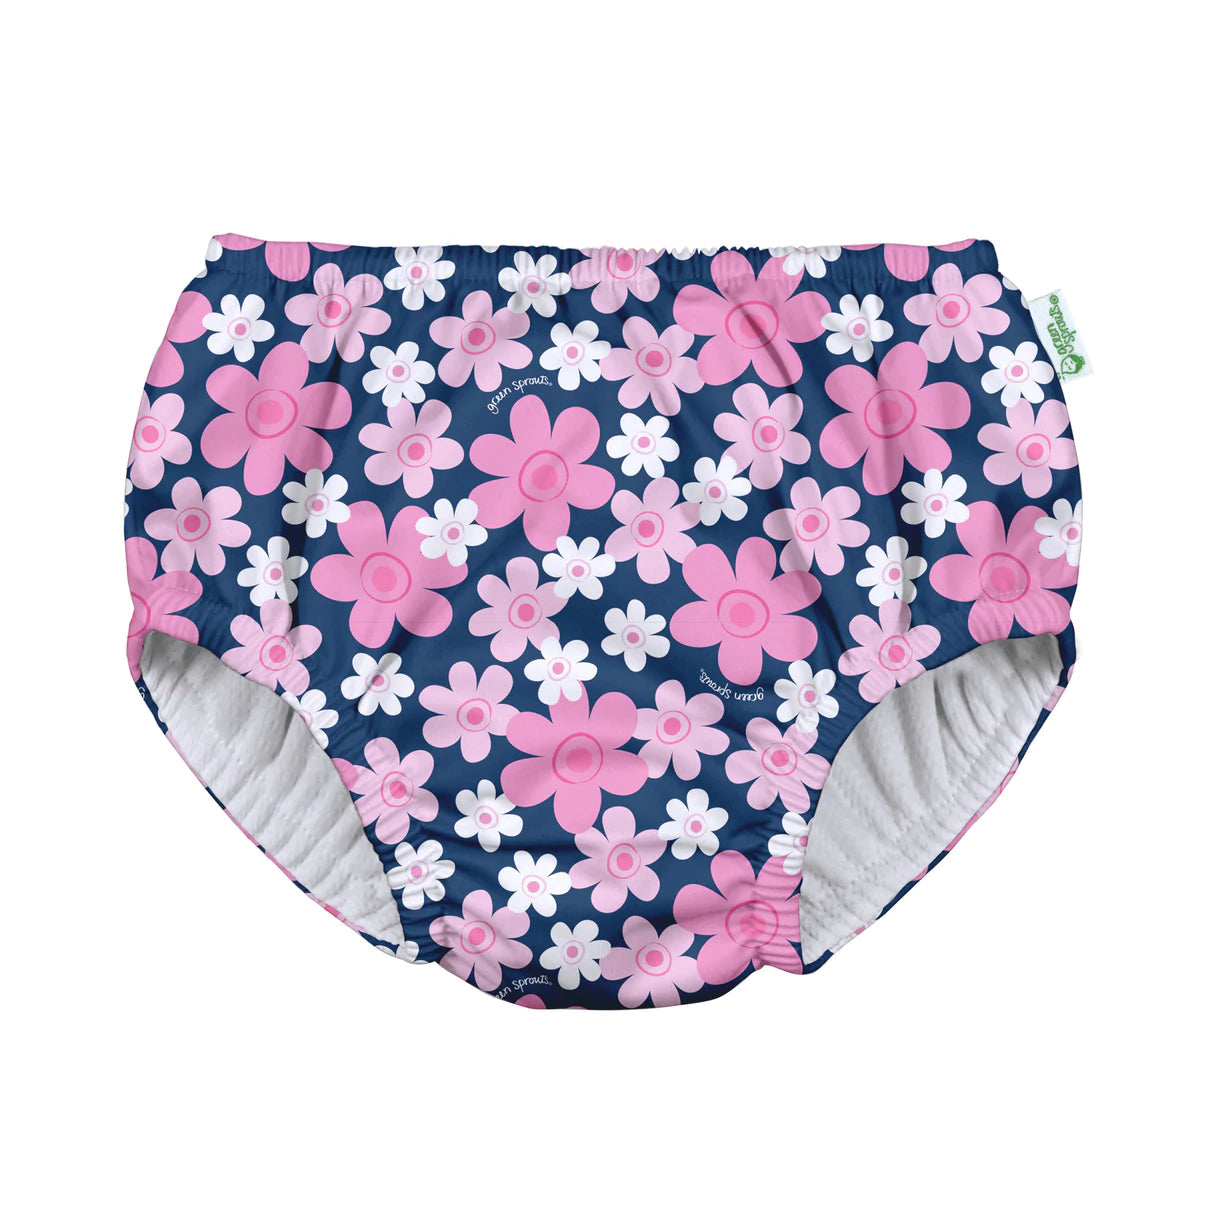 I Play Pull-Up Reusable Absorbent Swimsuit Diaper - Navy Blooms-I Play-Little Giant Kidz